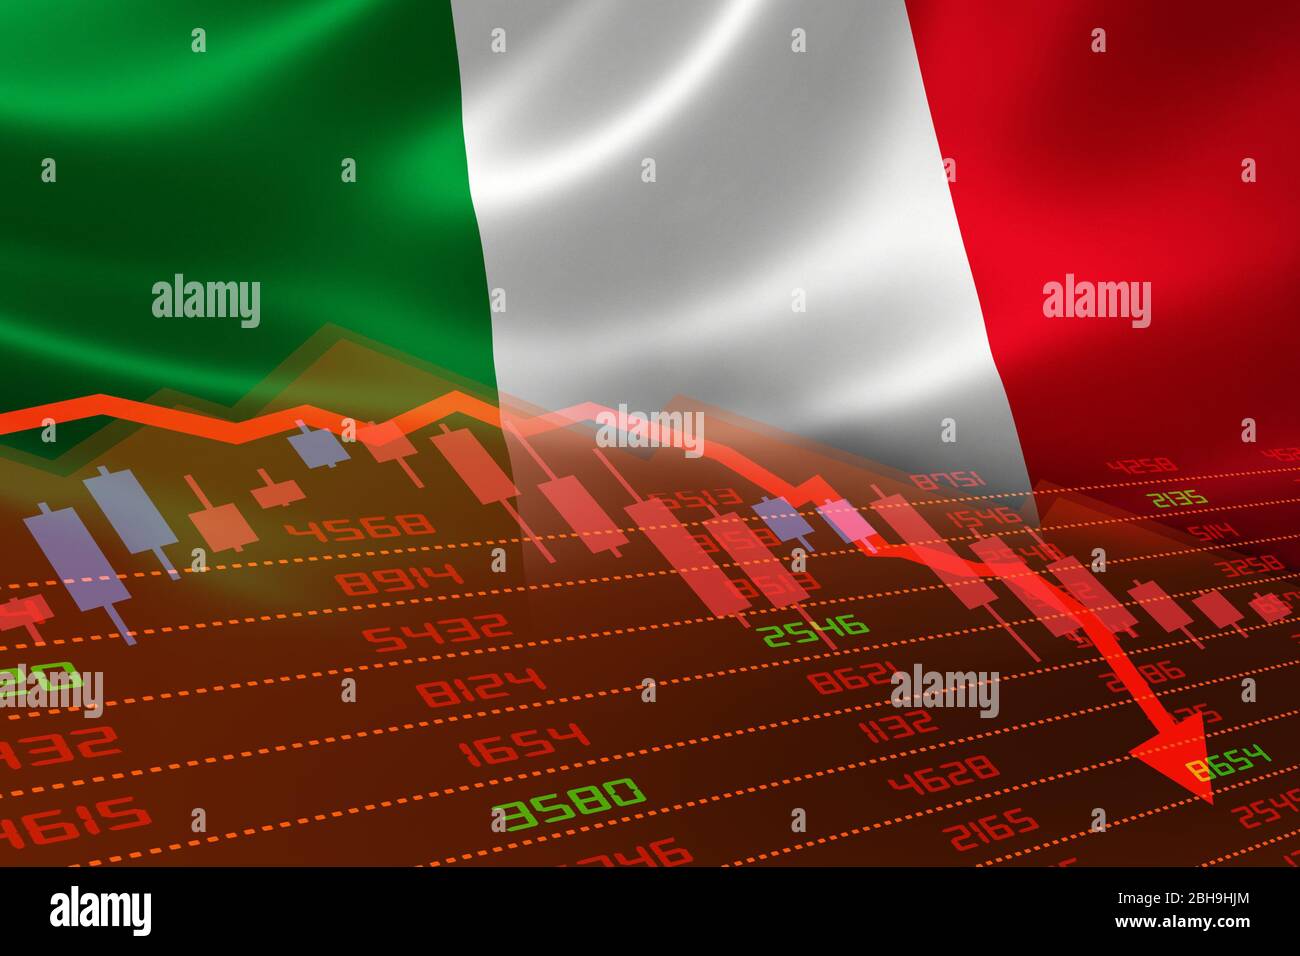 Italy economic downturn with stock exchange market showing stock chart down and in red negative territory. Business and financial money market crisis Stock Photo